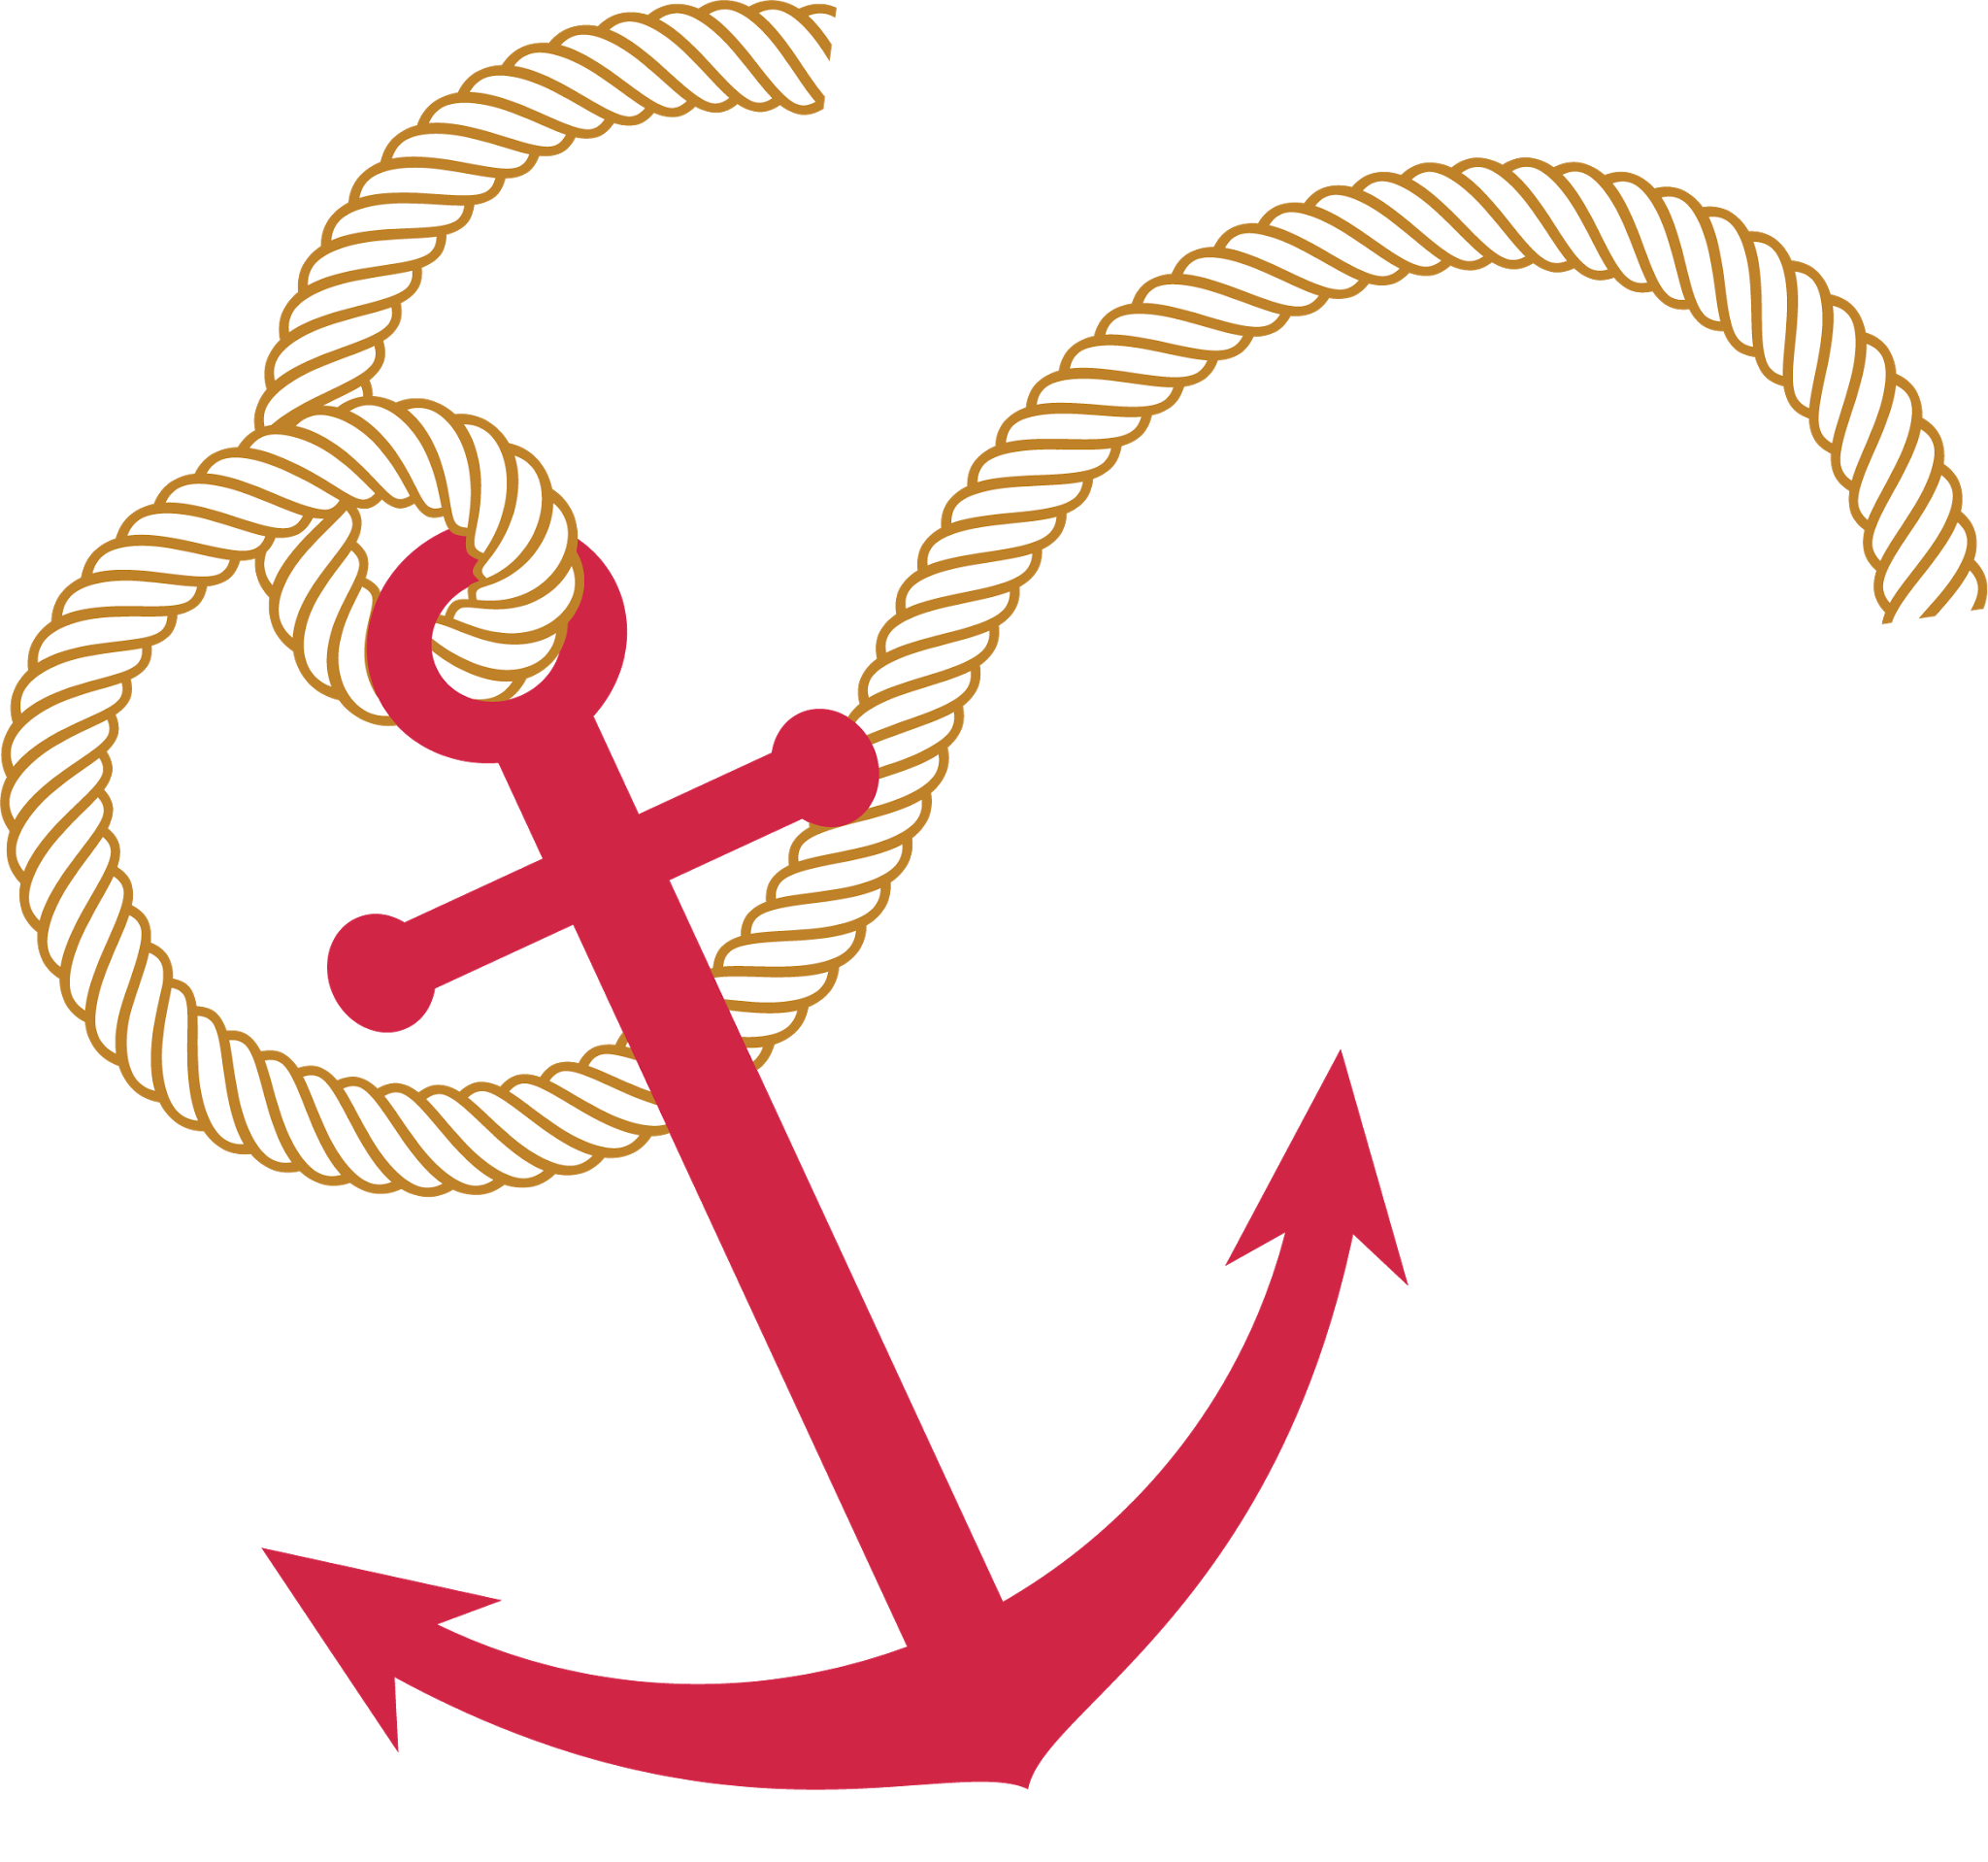 Wheel clipart anchor. Applications for clothes pinterest